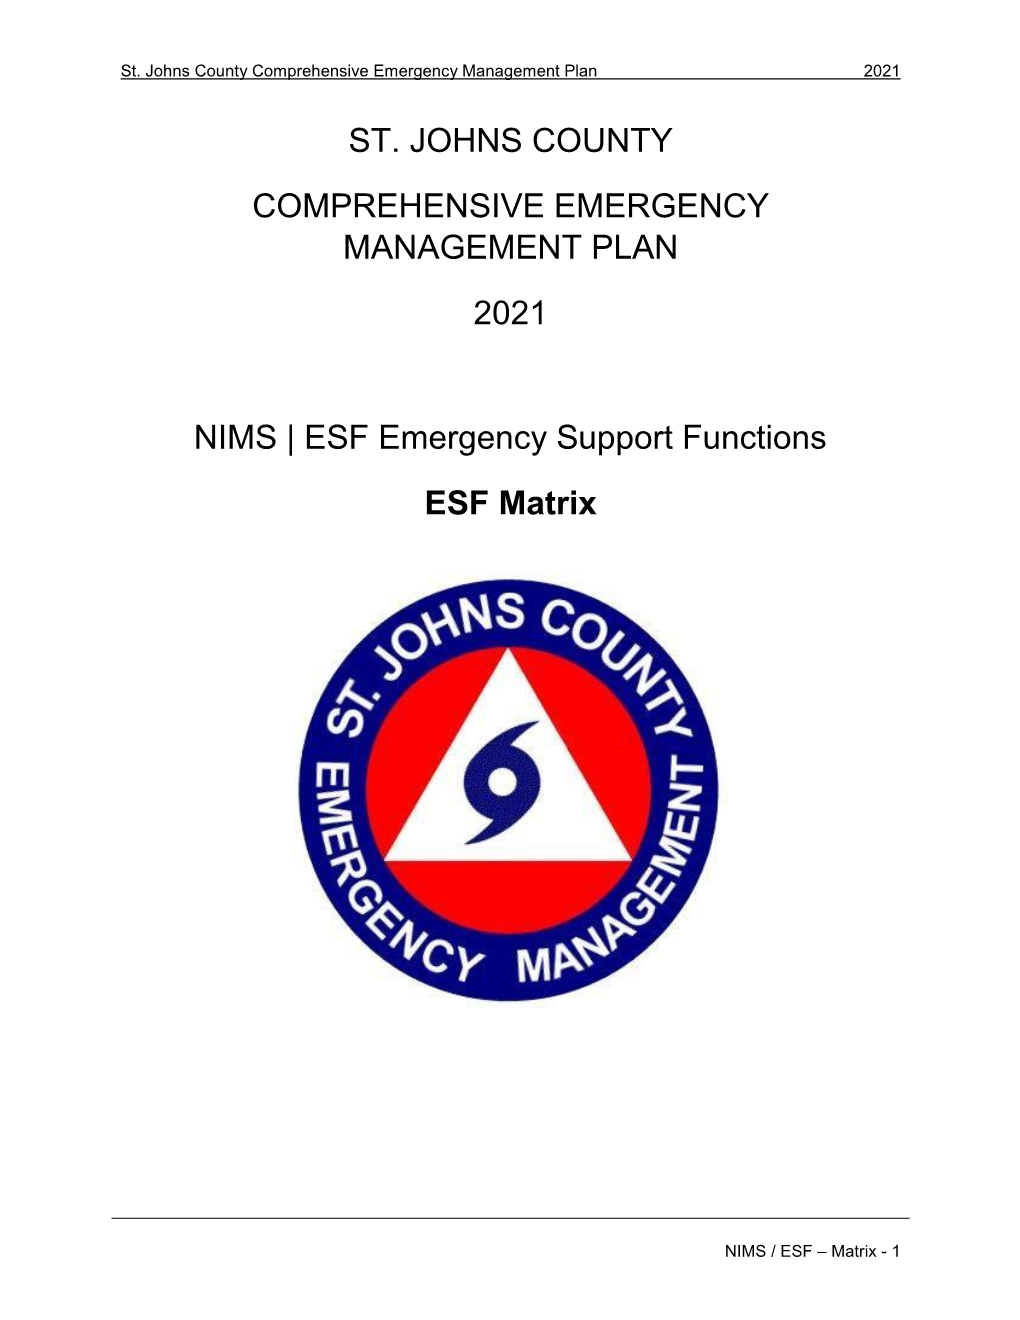 ESF Emergency Support Functions ESF Matrix